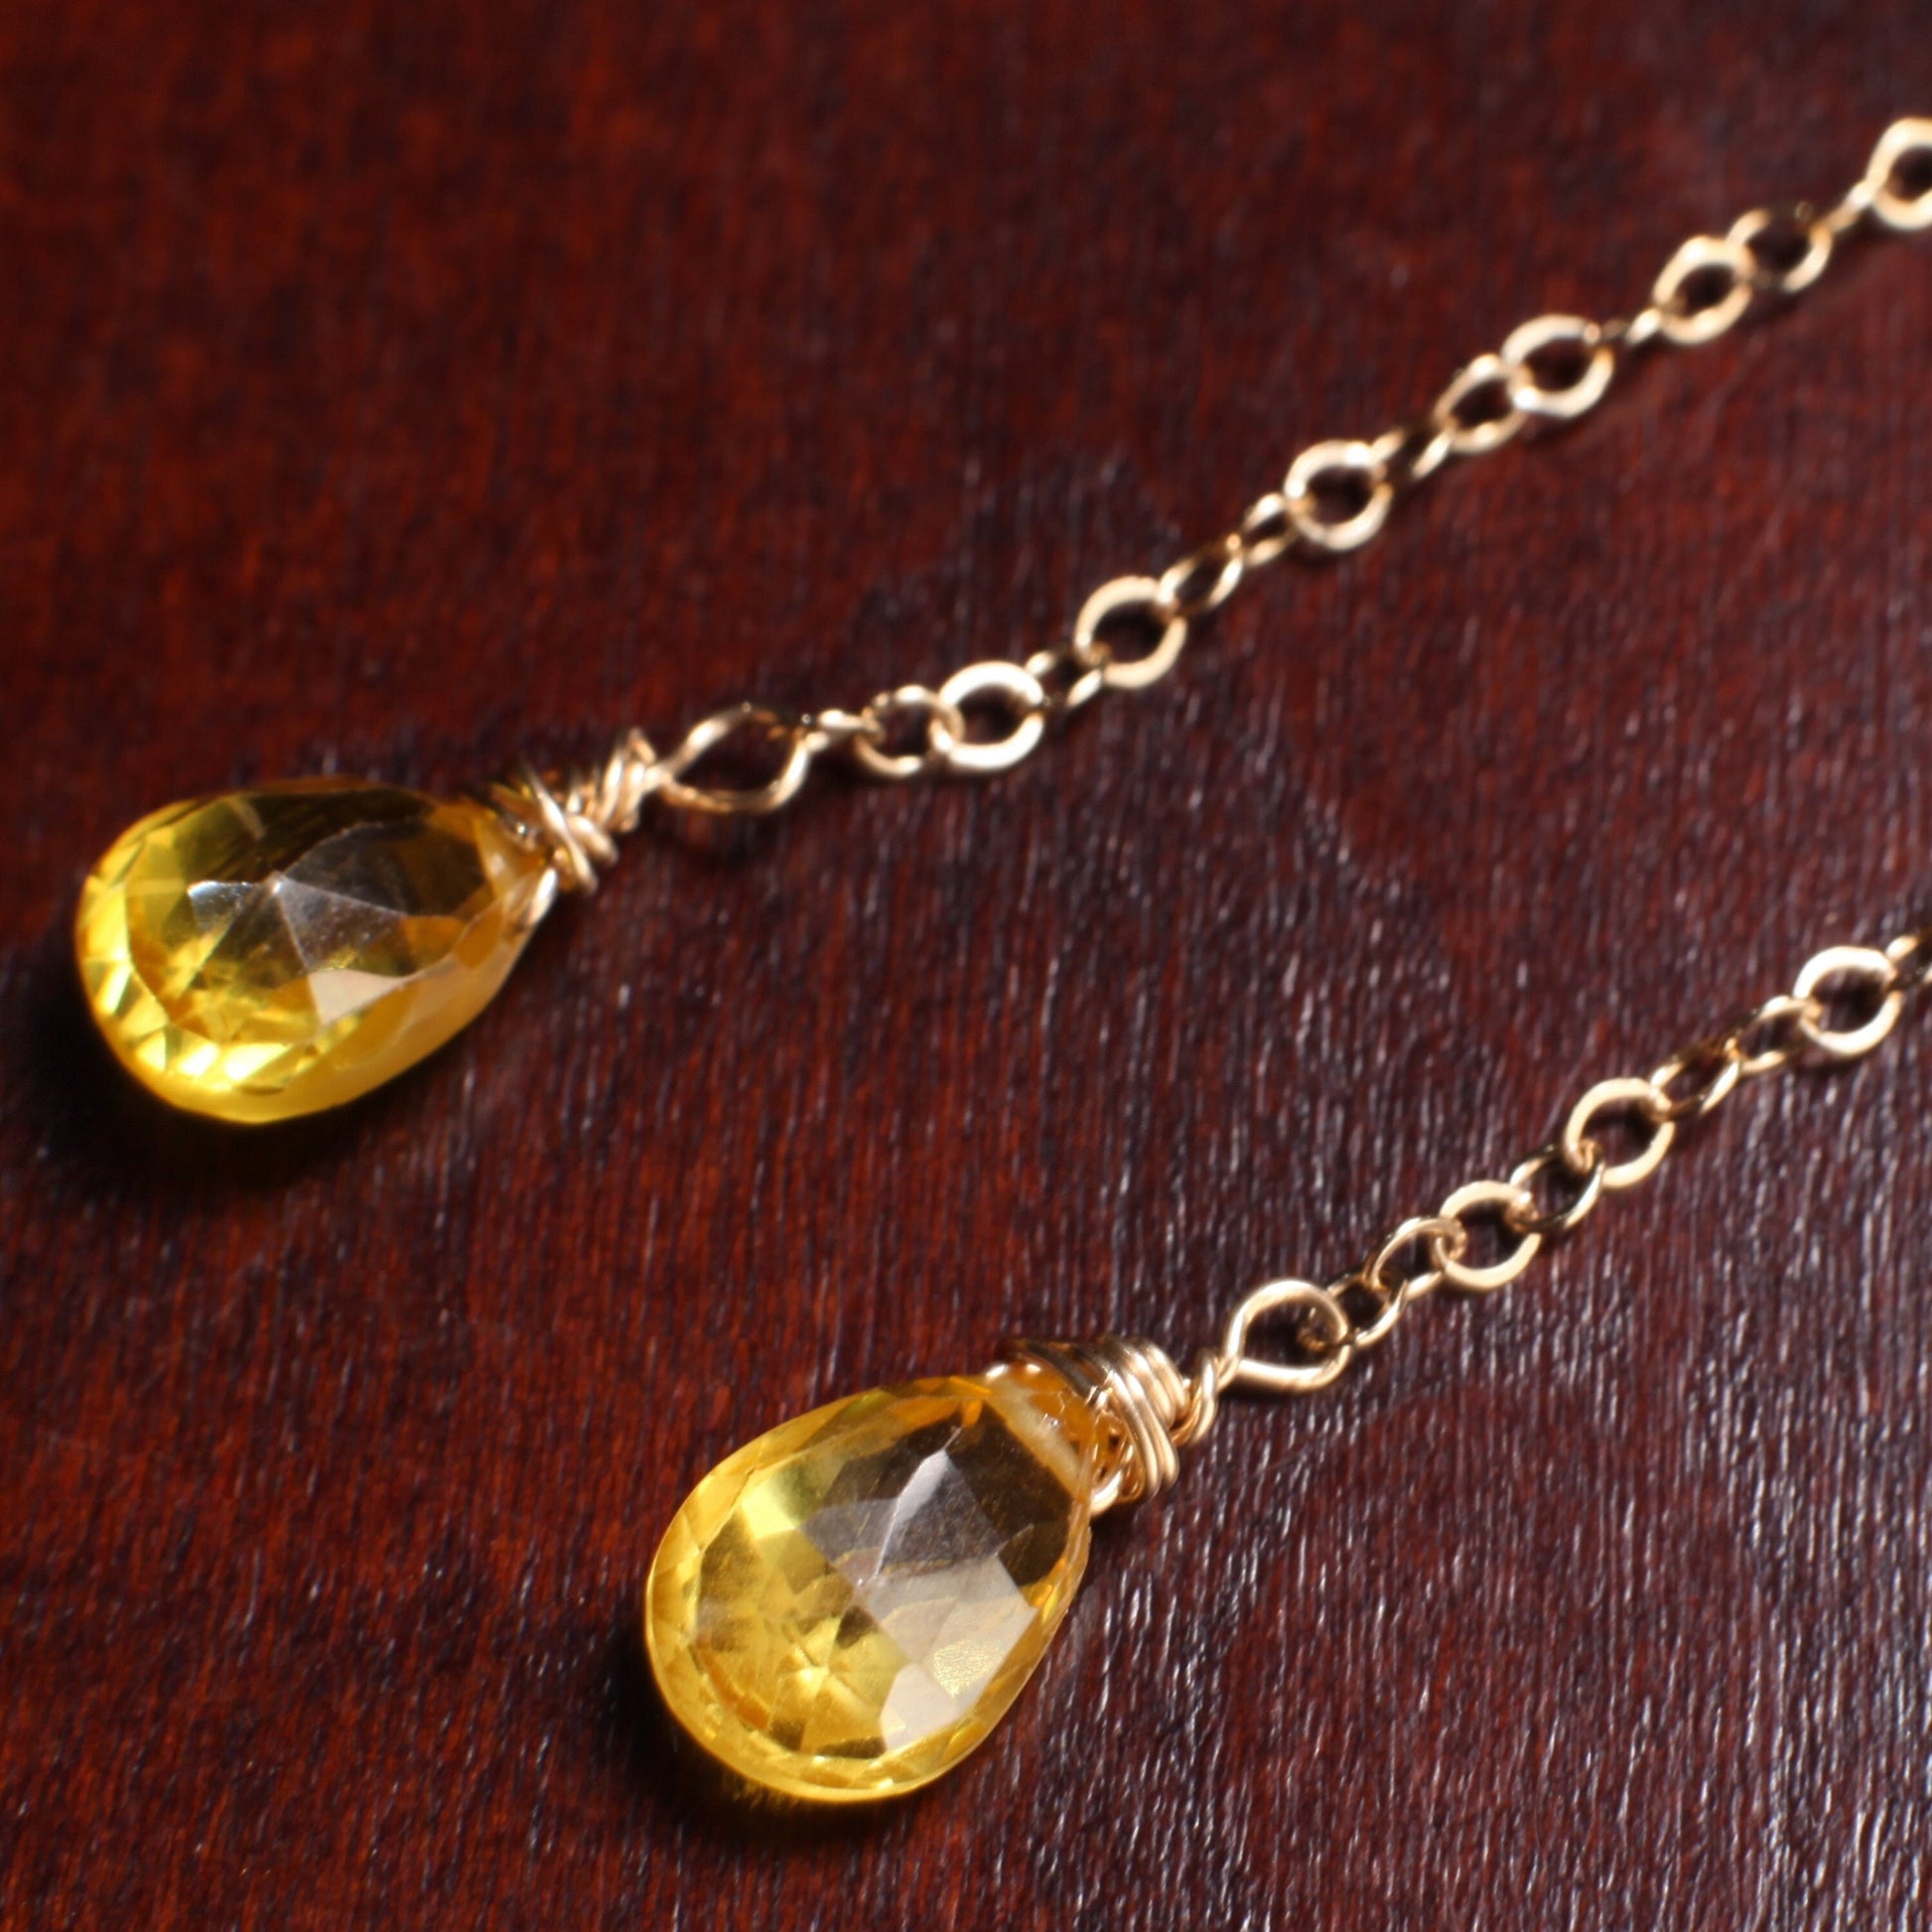 Yellow Citrine 6x9mm Wire Wrapped Teardrop Briolette with 14K Gold Filled Chain and Leverback Earrings, Gemstone Handmade Gift for Her